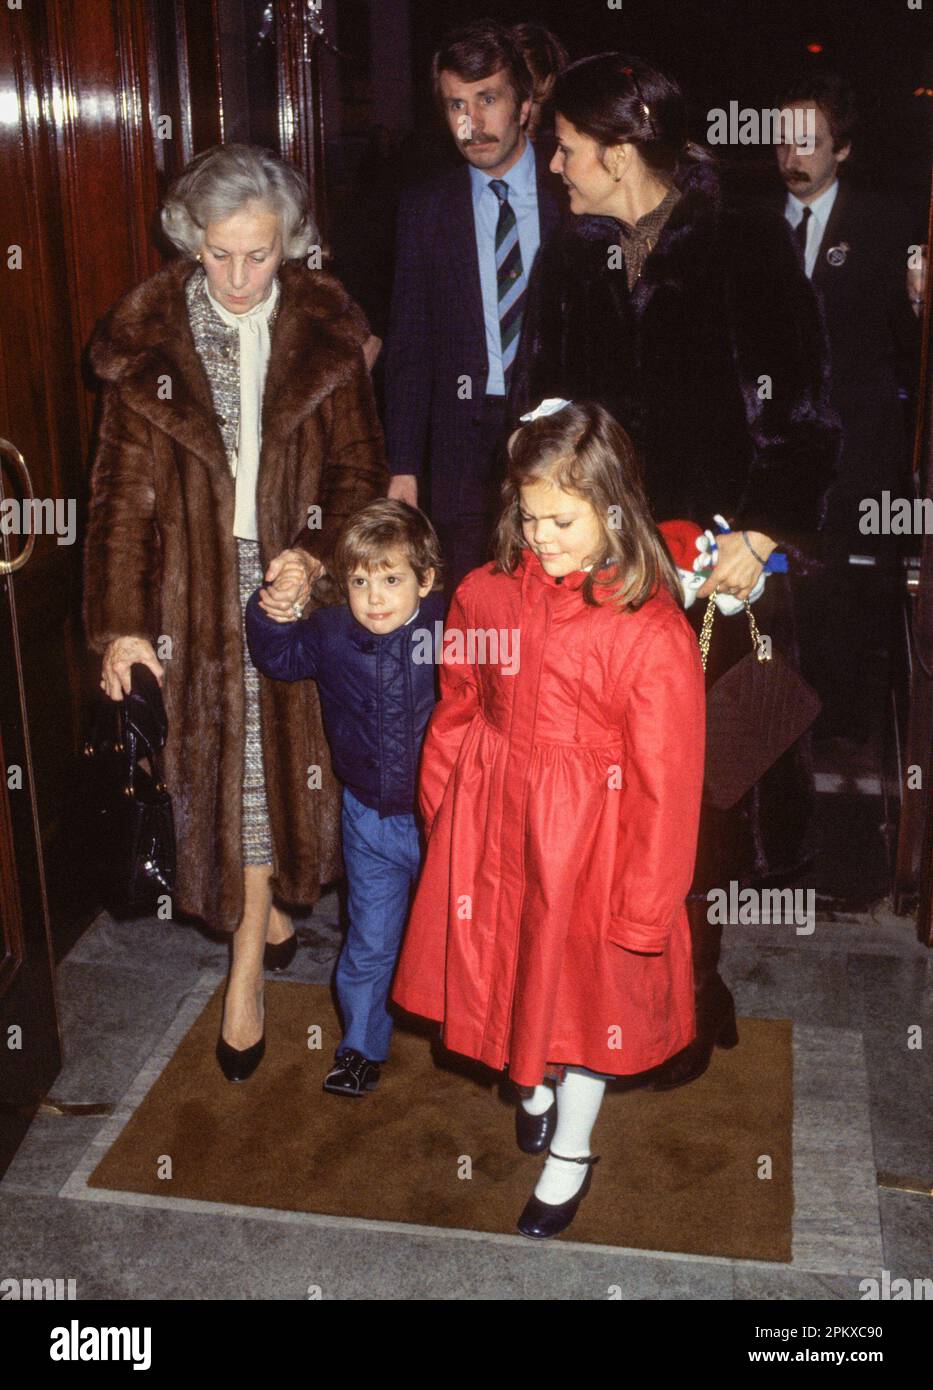 SWEDISH QUEEN SILVIA together with Princess Lilian and prince Carl Philip and Crown Princess Victoria at Royal Dramatic Theater Dramaten 1993 for childrens play Stock Photo